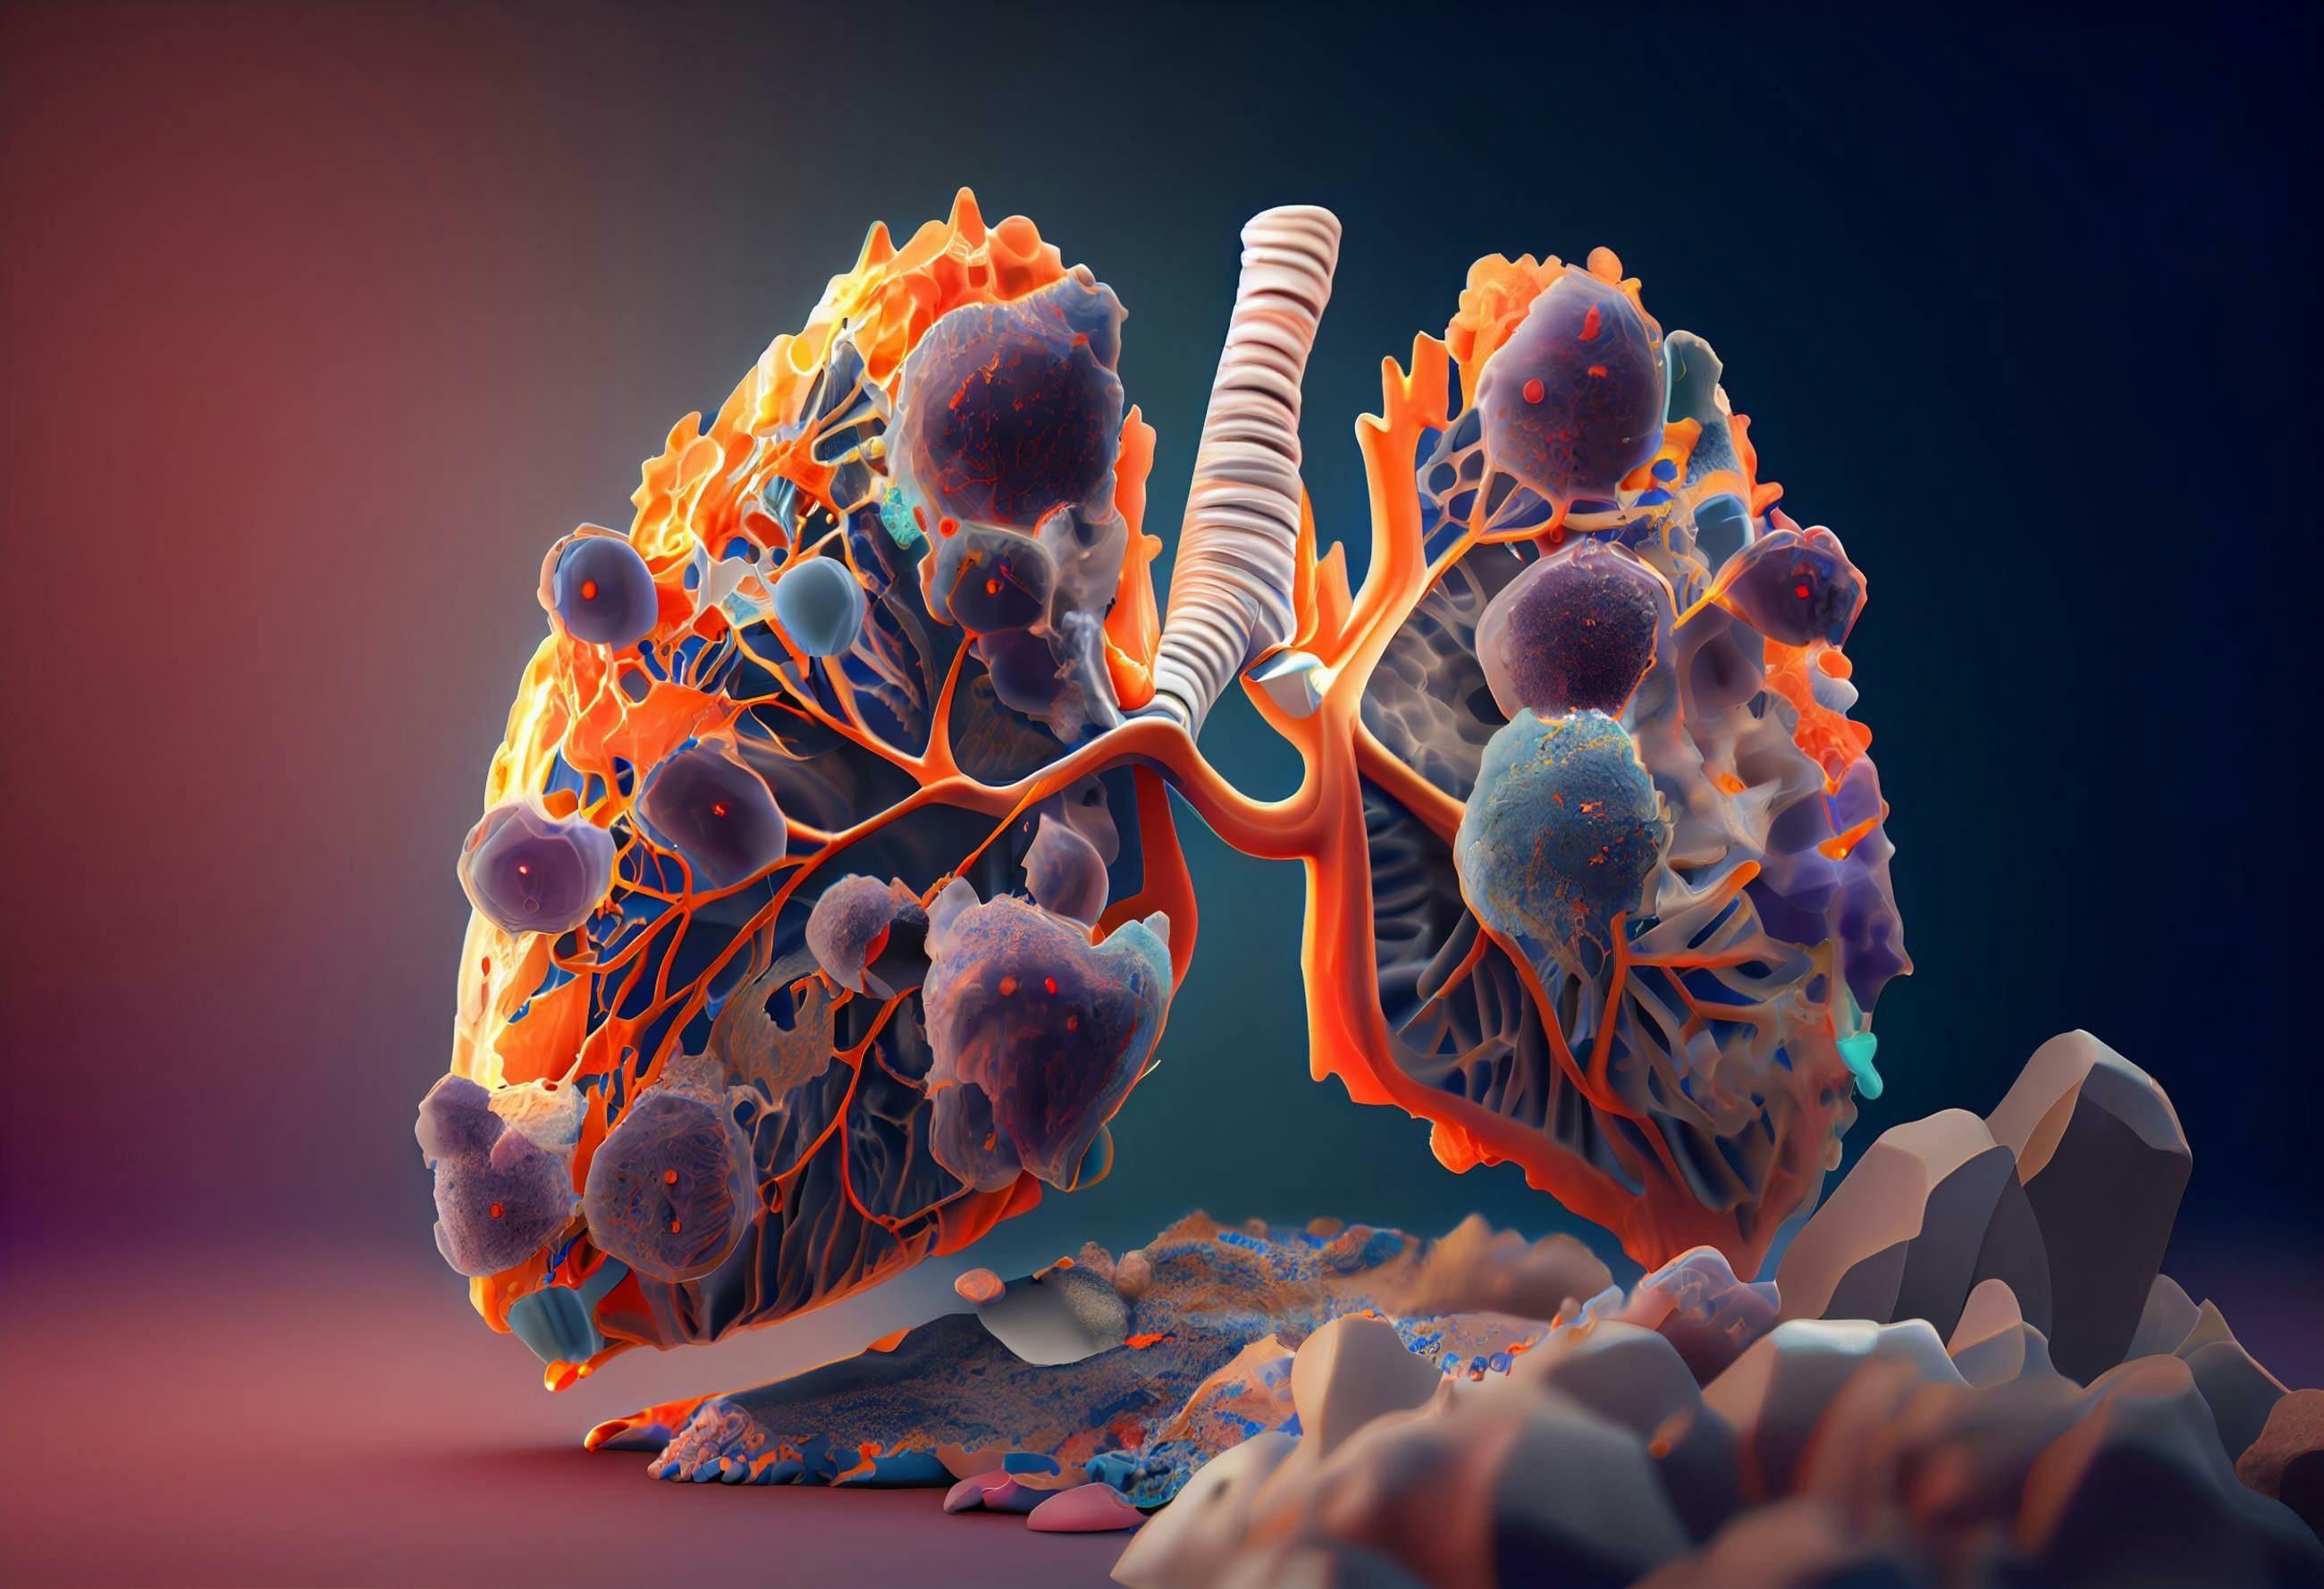 KRAS G12C mutation in non-small cell lung cancer: © Aiden - stock.adobe.com